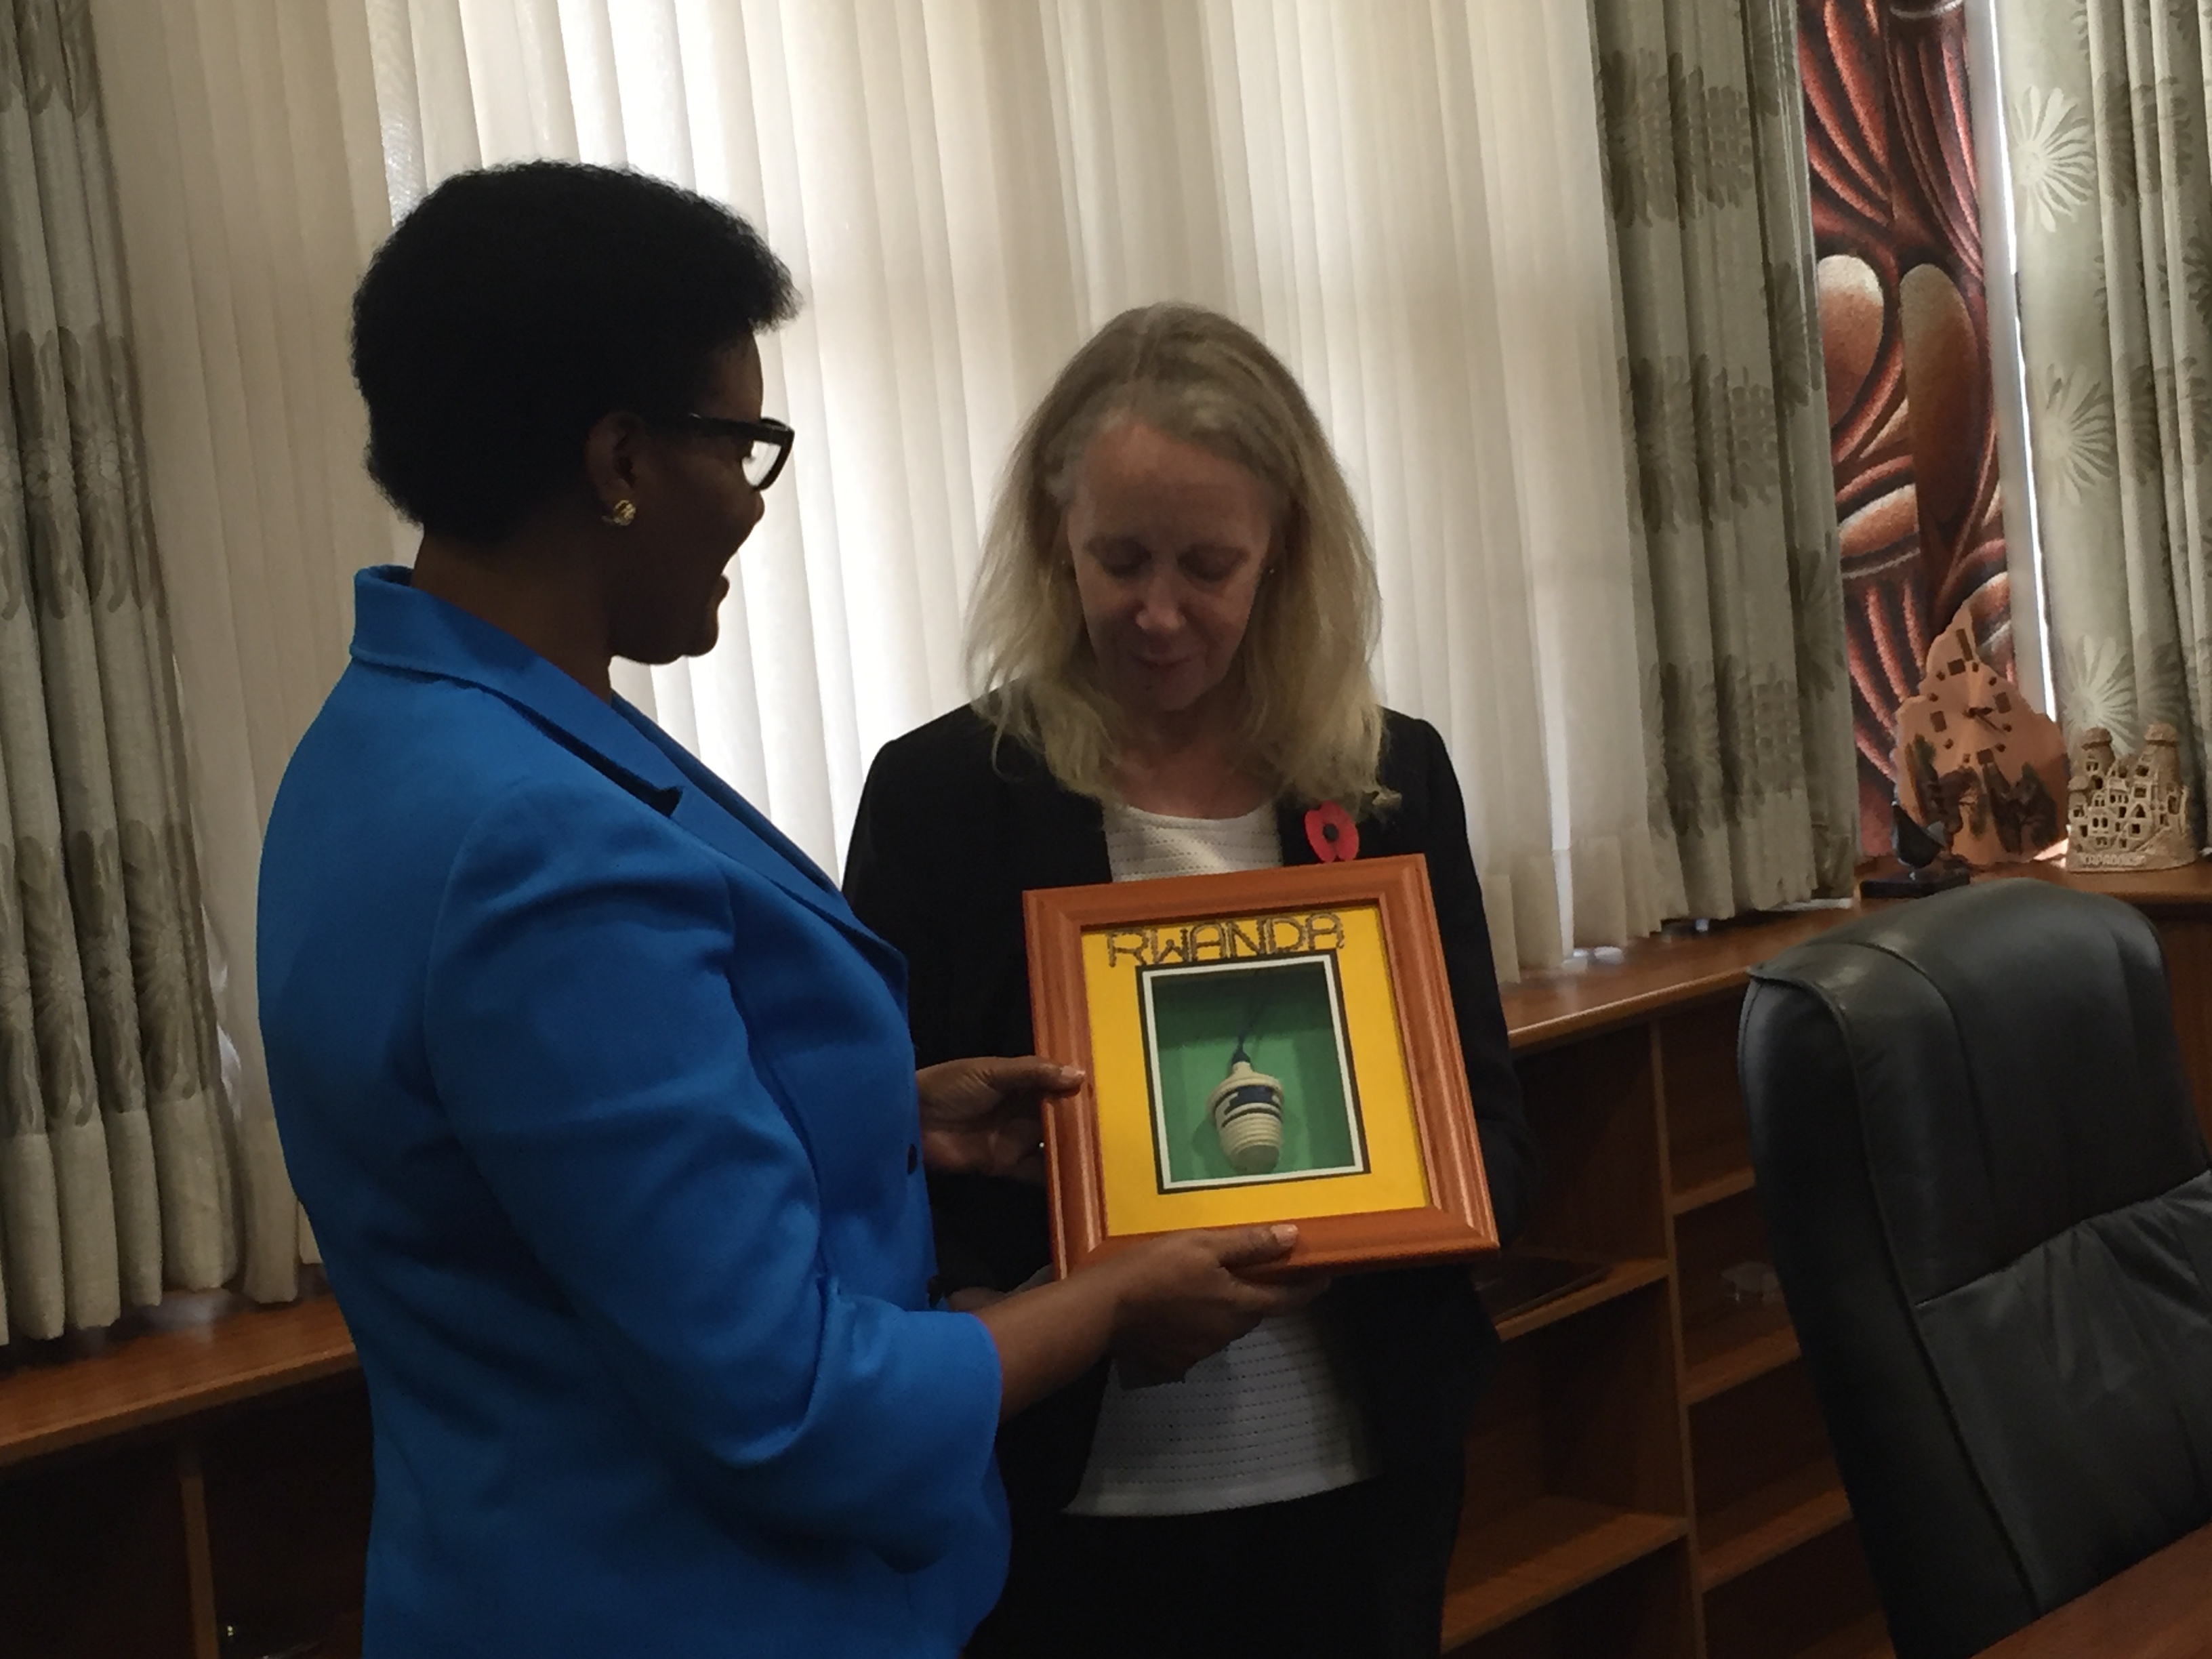 We were welcomed to the Parliament of Rwanda by HE Donatille Mukabalisa, Speaker of the Chamber of Deputies